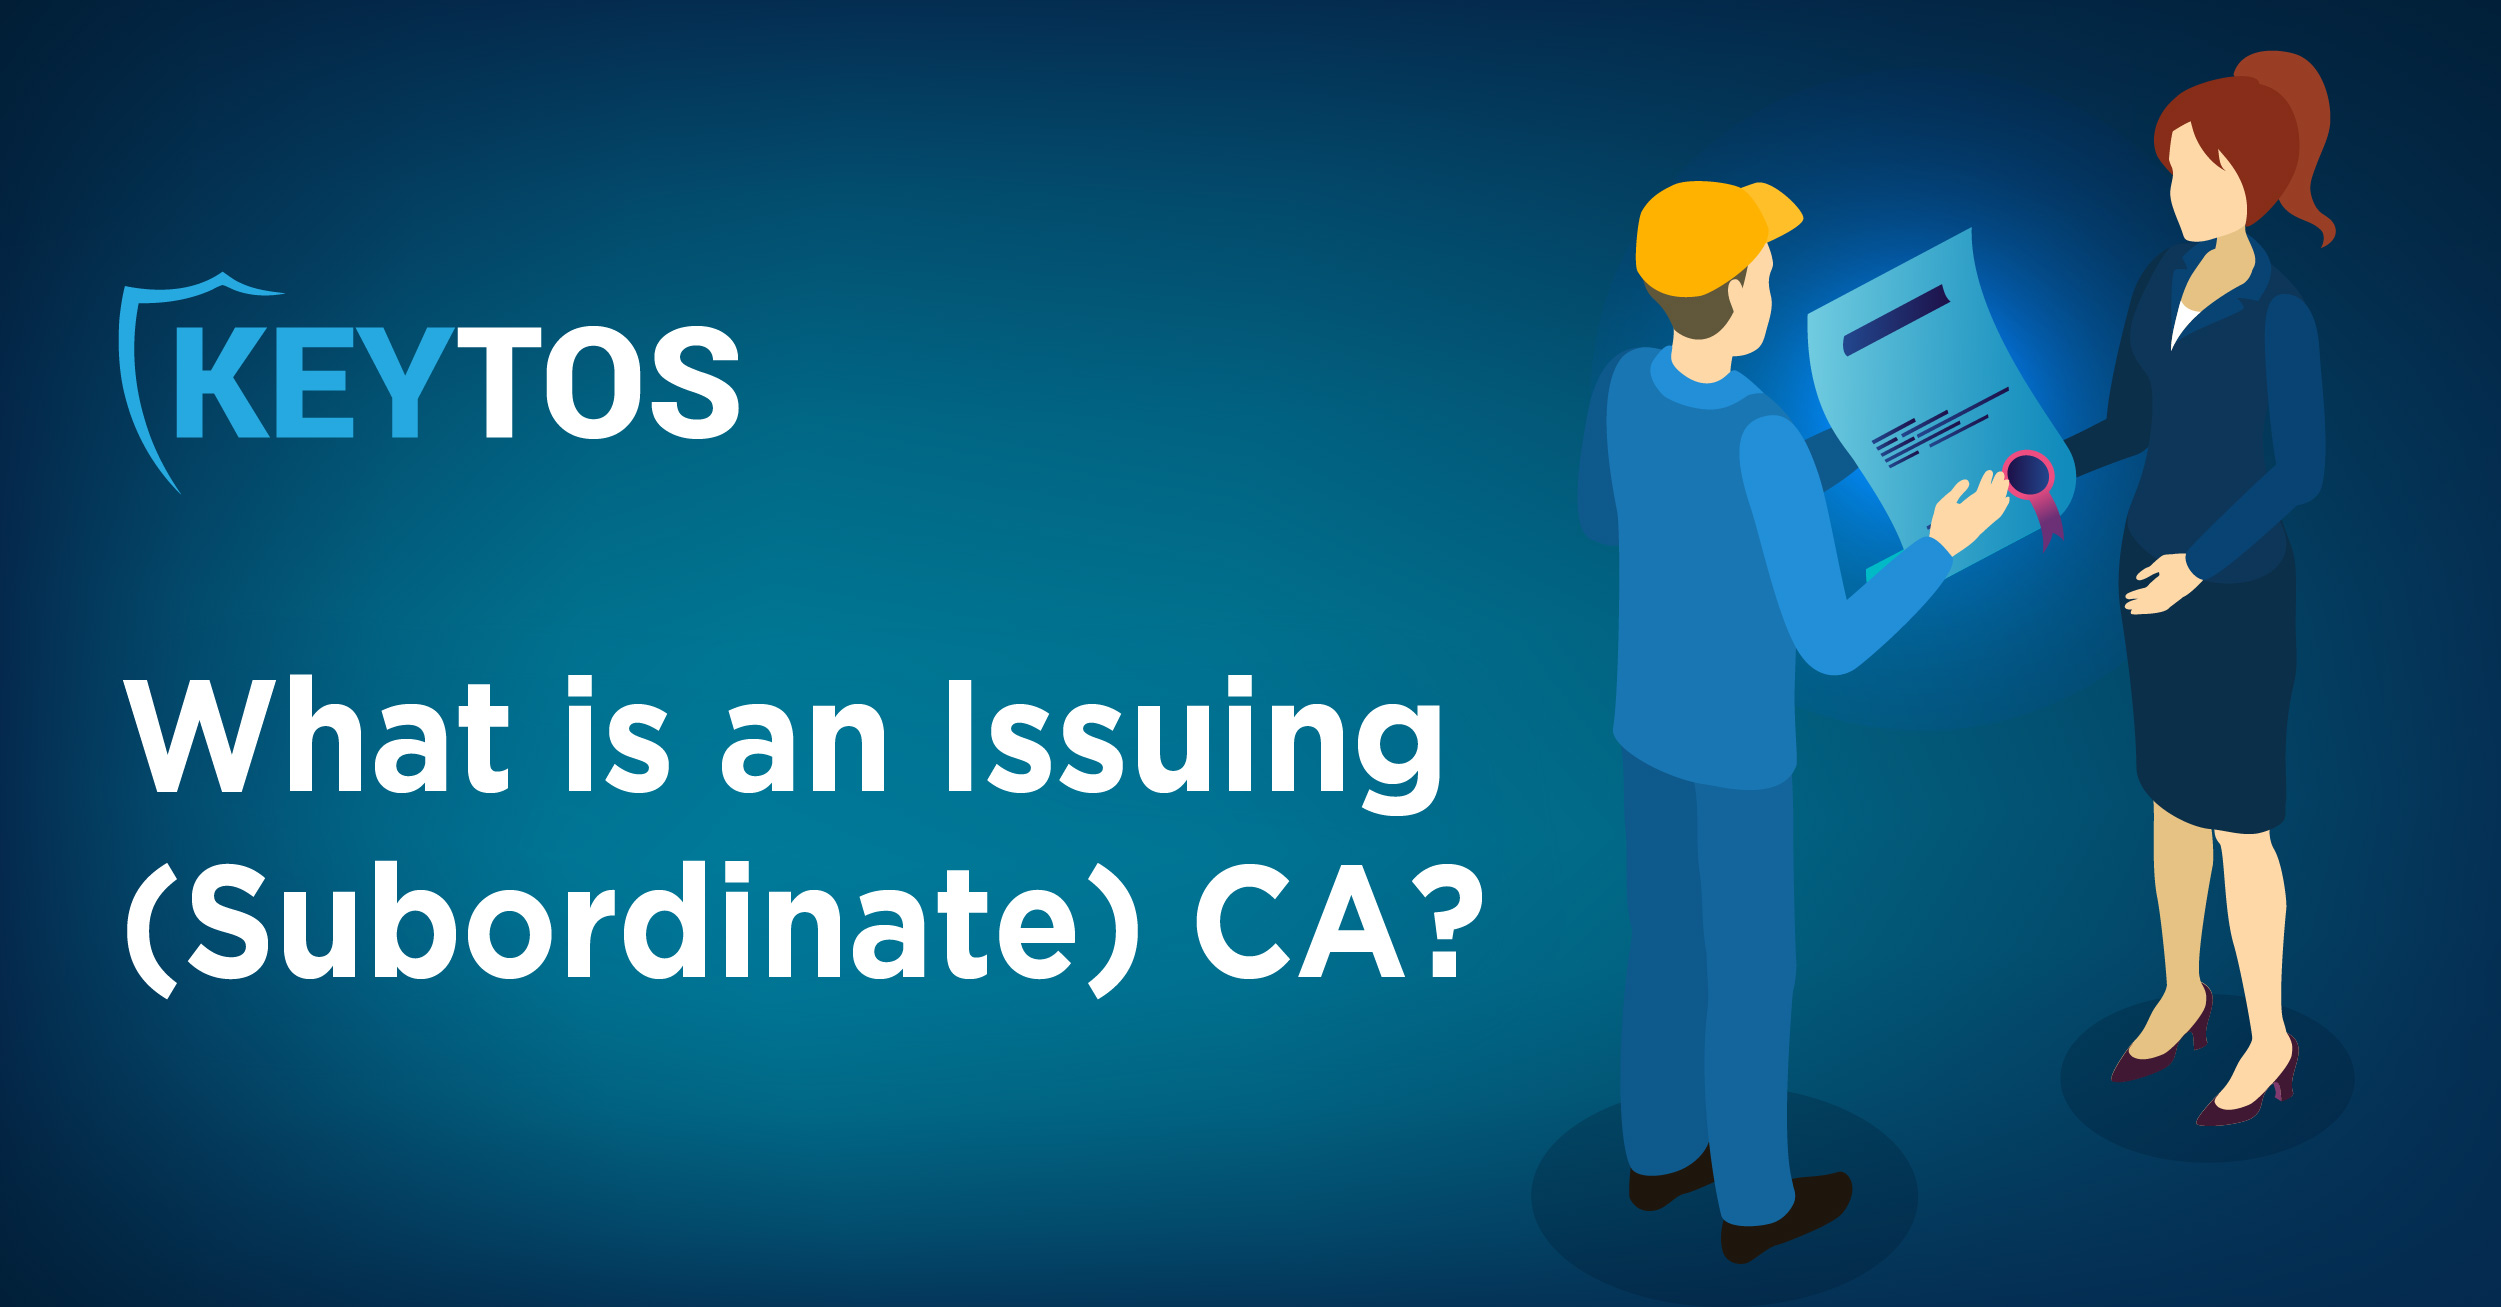 What is a Subordinate (Issuing) Certificate Authority?